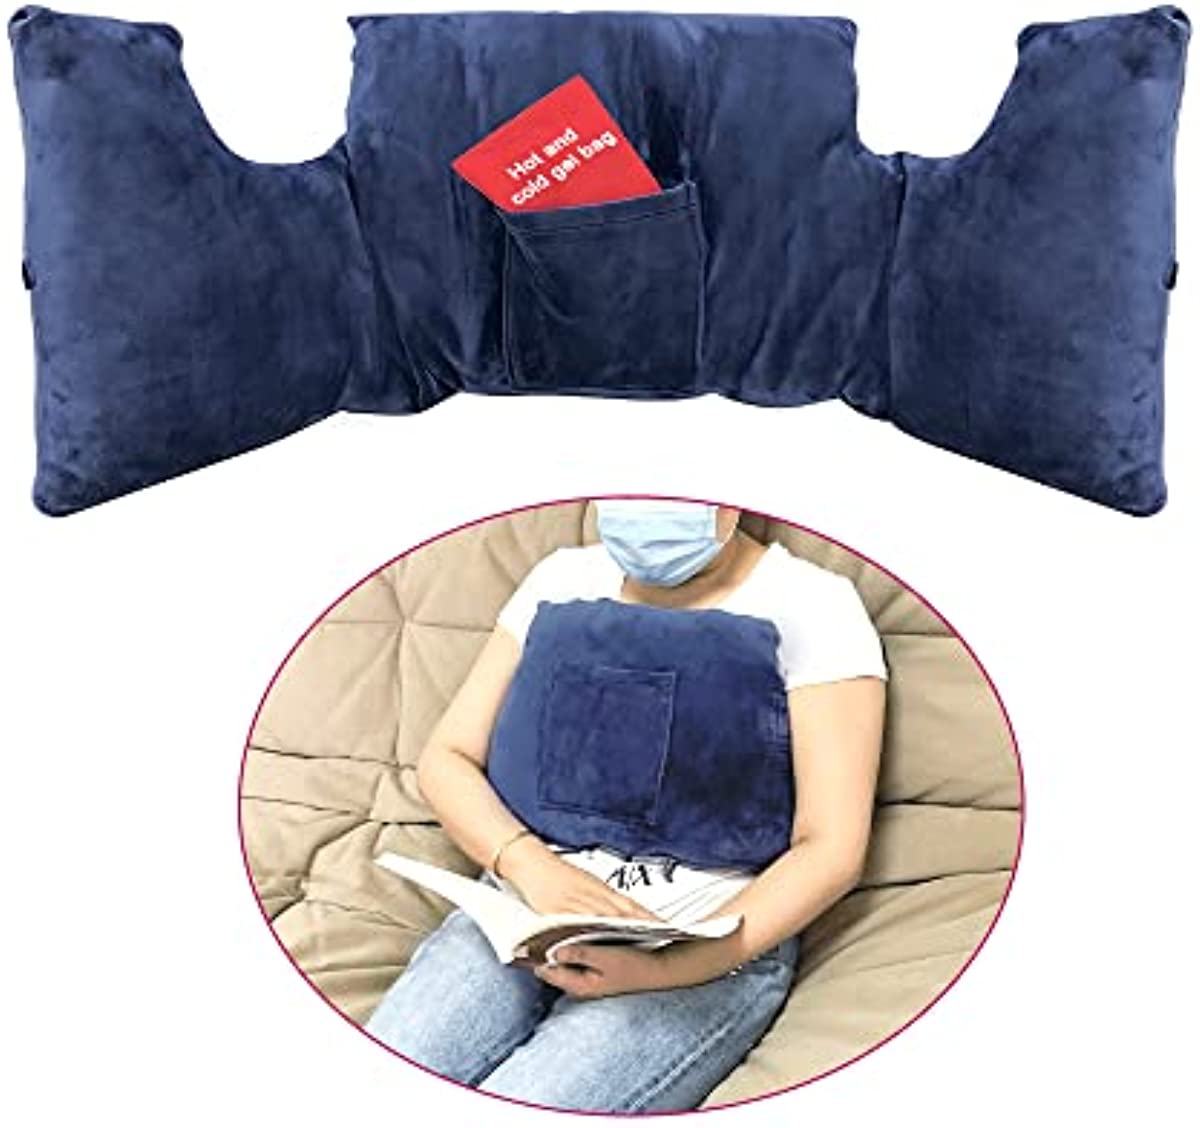 Hysterectomy Pillow Tummy Tuck C Section Recovery Products Post Surgery Mastectomy Seatbelt Pillows with Pocket for Stomach Belly Hernia Abdominal Endometriosis Cancer Gifts